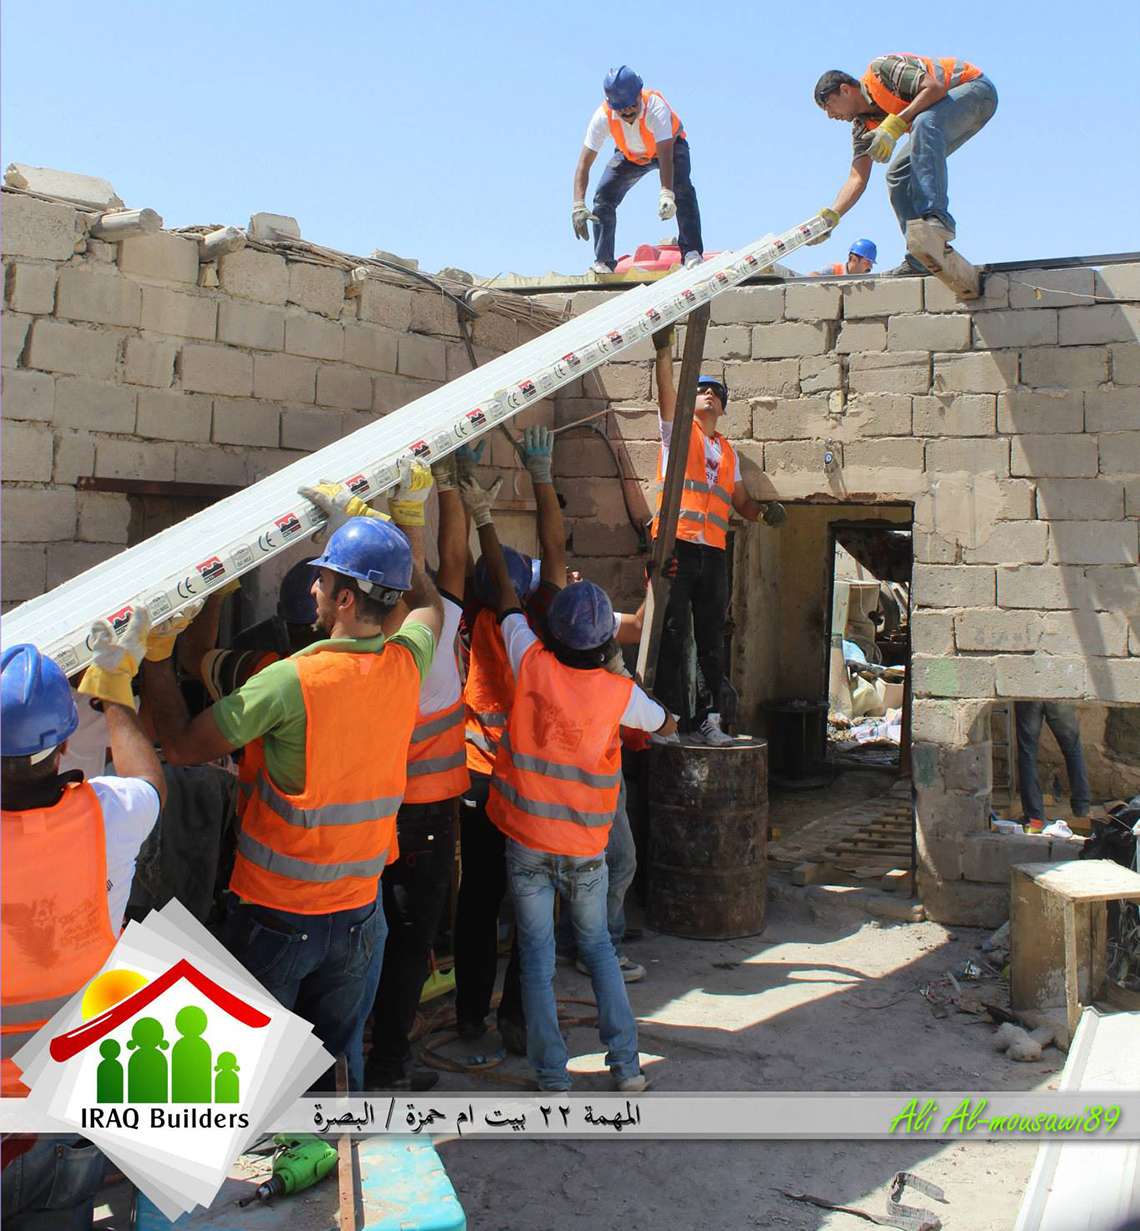 A team from Iraq Builders puts a new roof on a bombed-out home in Basrah, Iraq last August. Photo: Courtesy of Iraq Builders